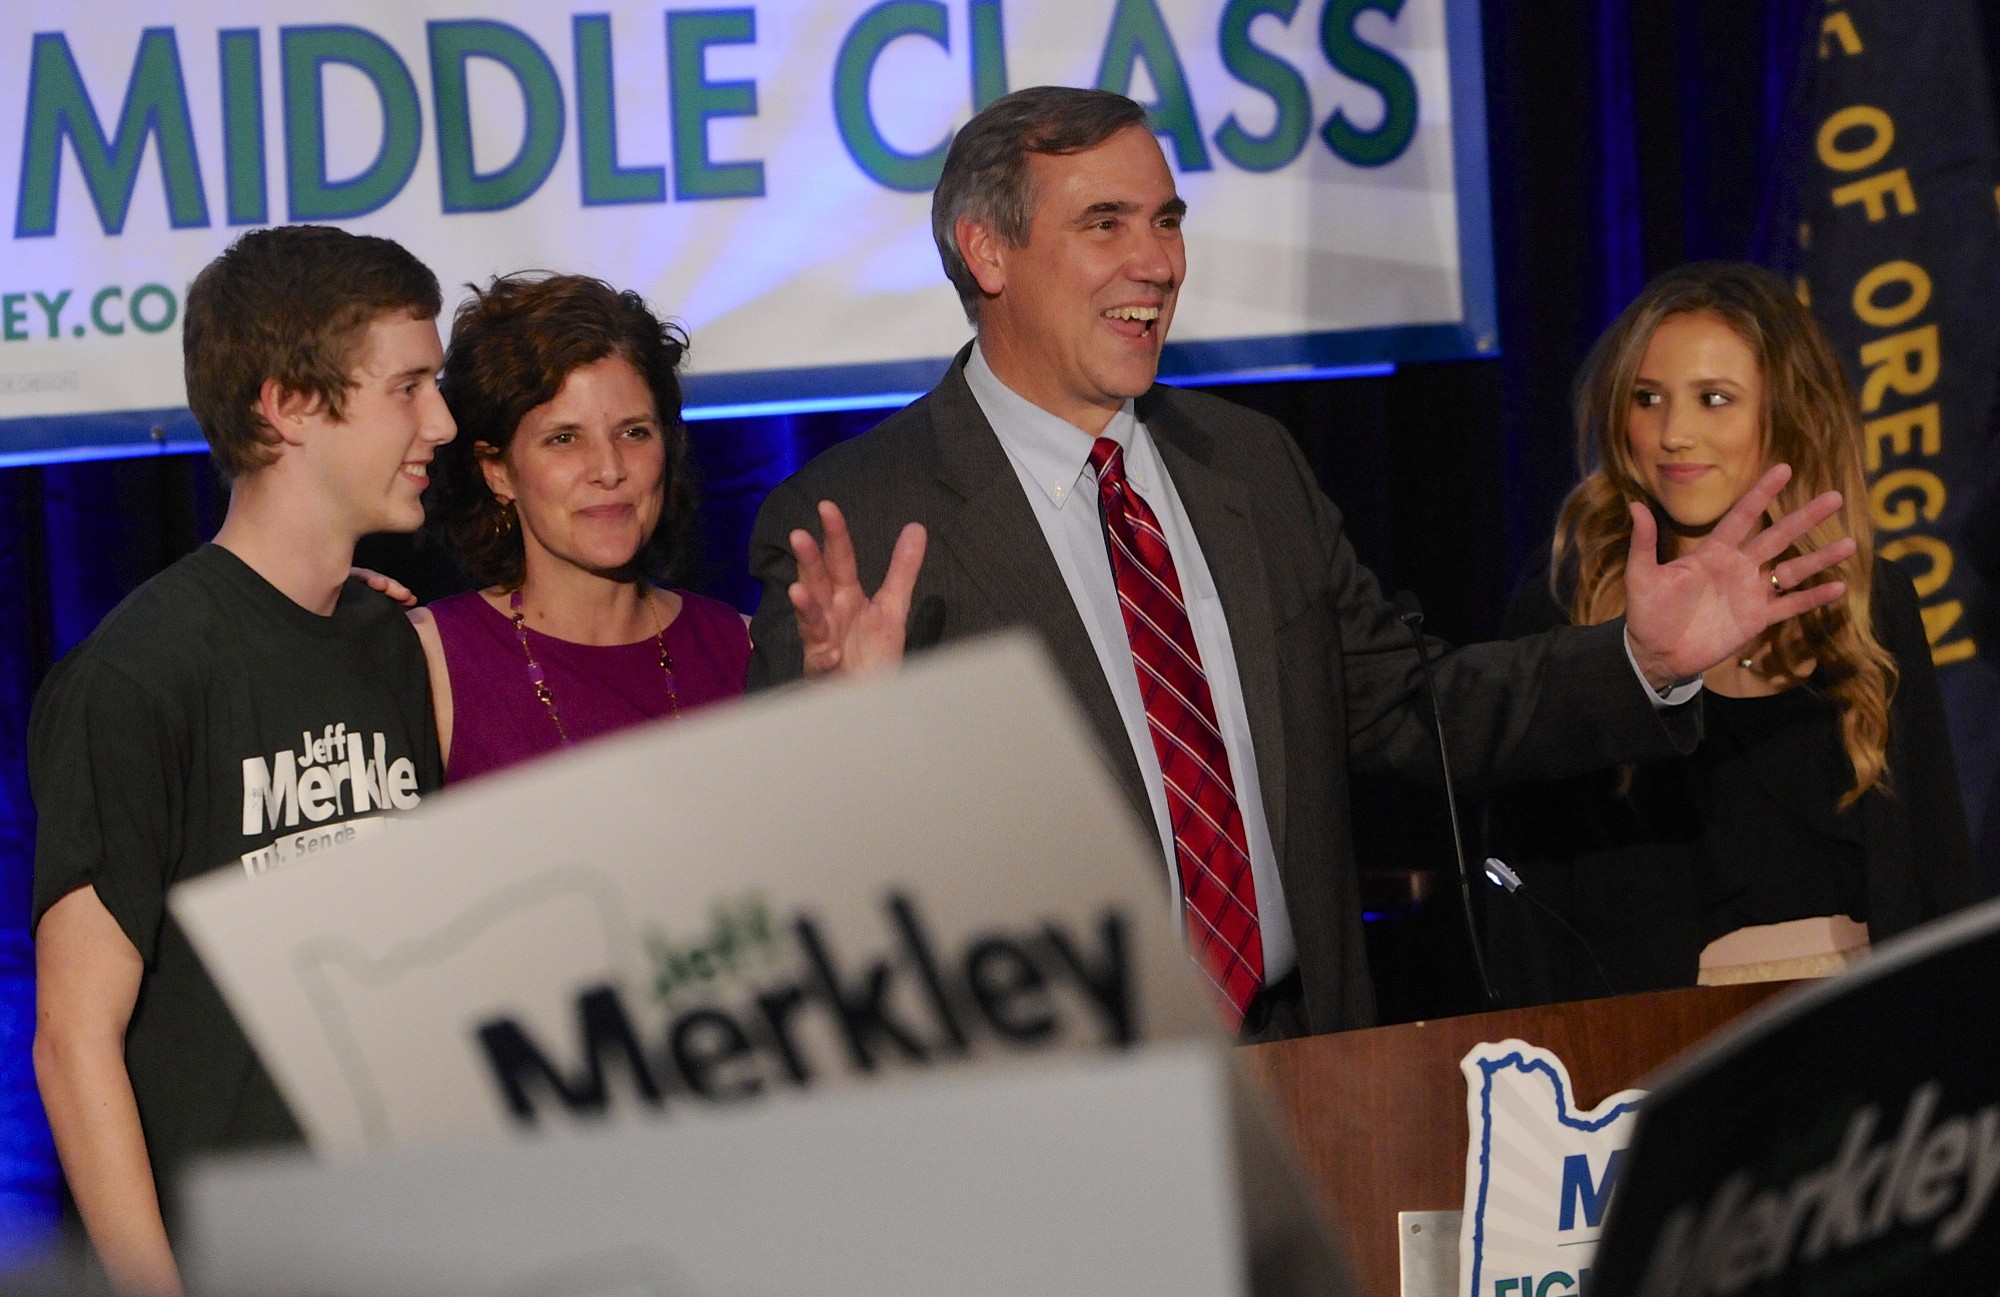 Sen. Jeff Merkley, D-Ore., center, with, from left, son Jonathan Merkely, wife Mary and daughter Brynne Merkely, greets supporters at the Democratic election night party in Portland on Tuesday. Merkley was re-elected to the U.S. Senate.